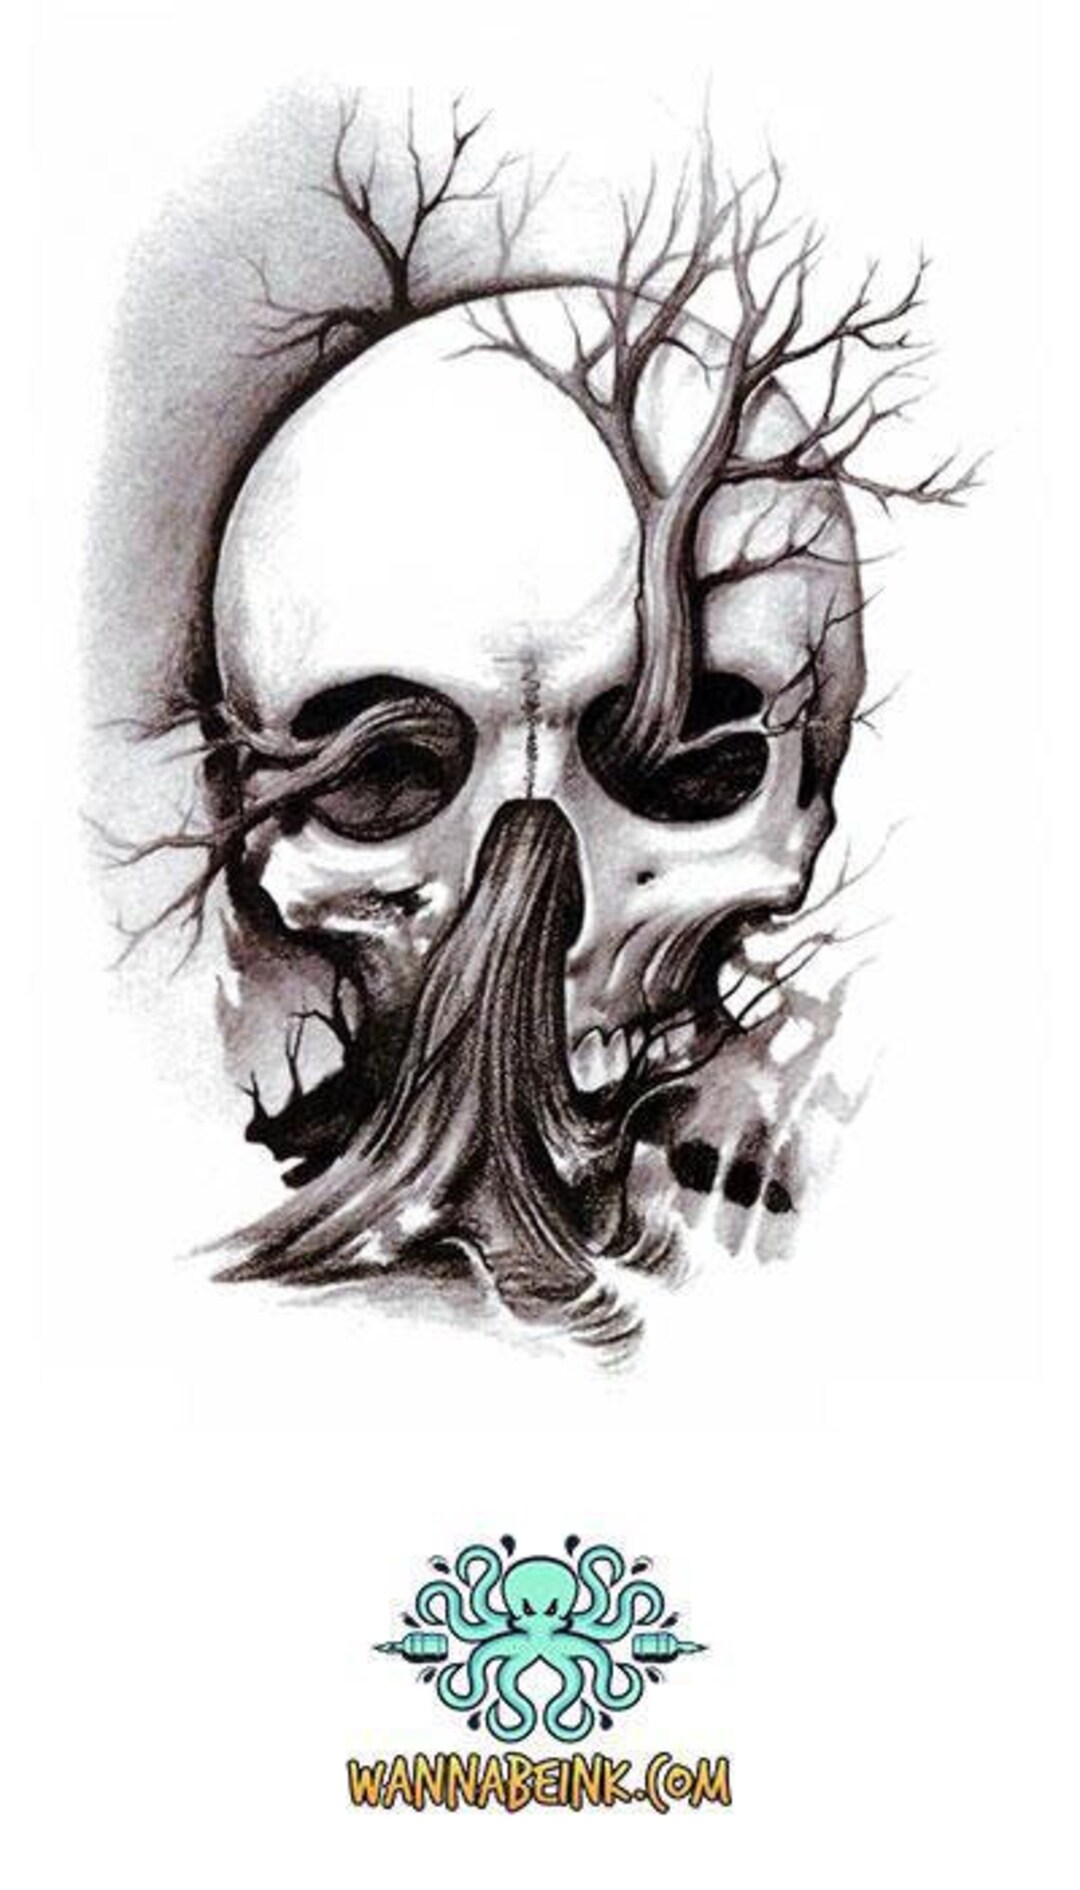 Buy Bare Tree Growing Through Skull Best Temporary Tattoos Online in India   Etsy